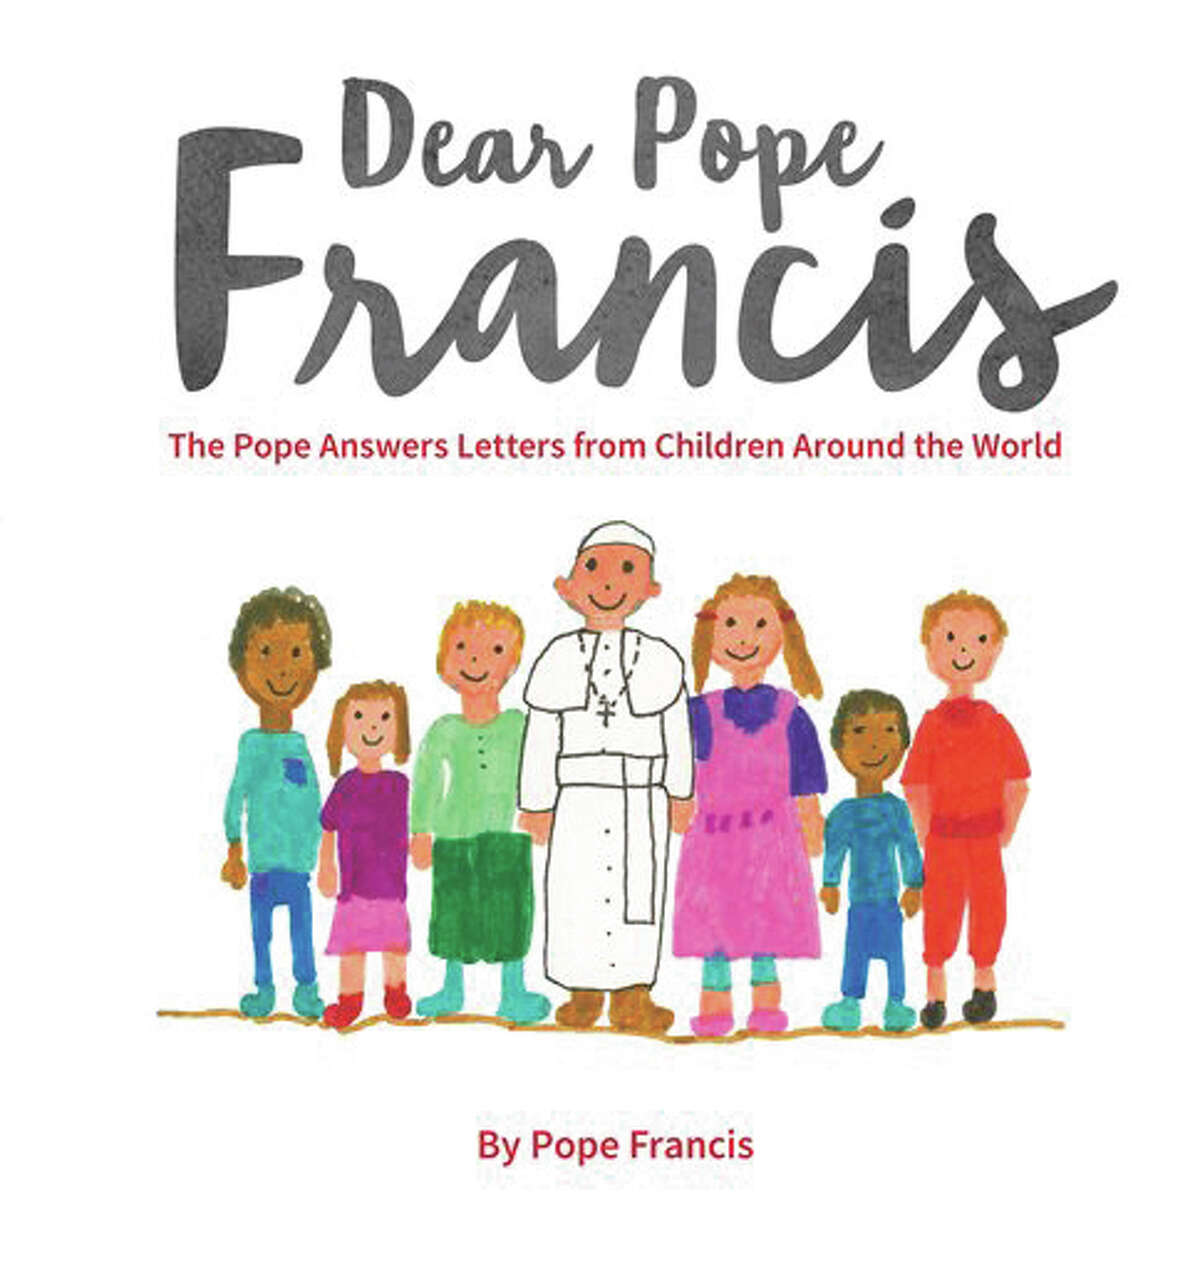 This image released by Loyola Press shows “Dear Pope Francis: The Pope Answers Letters from Children Around the World,” by Pope Francis.